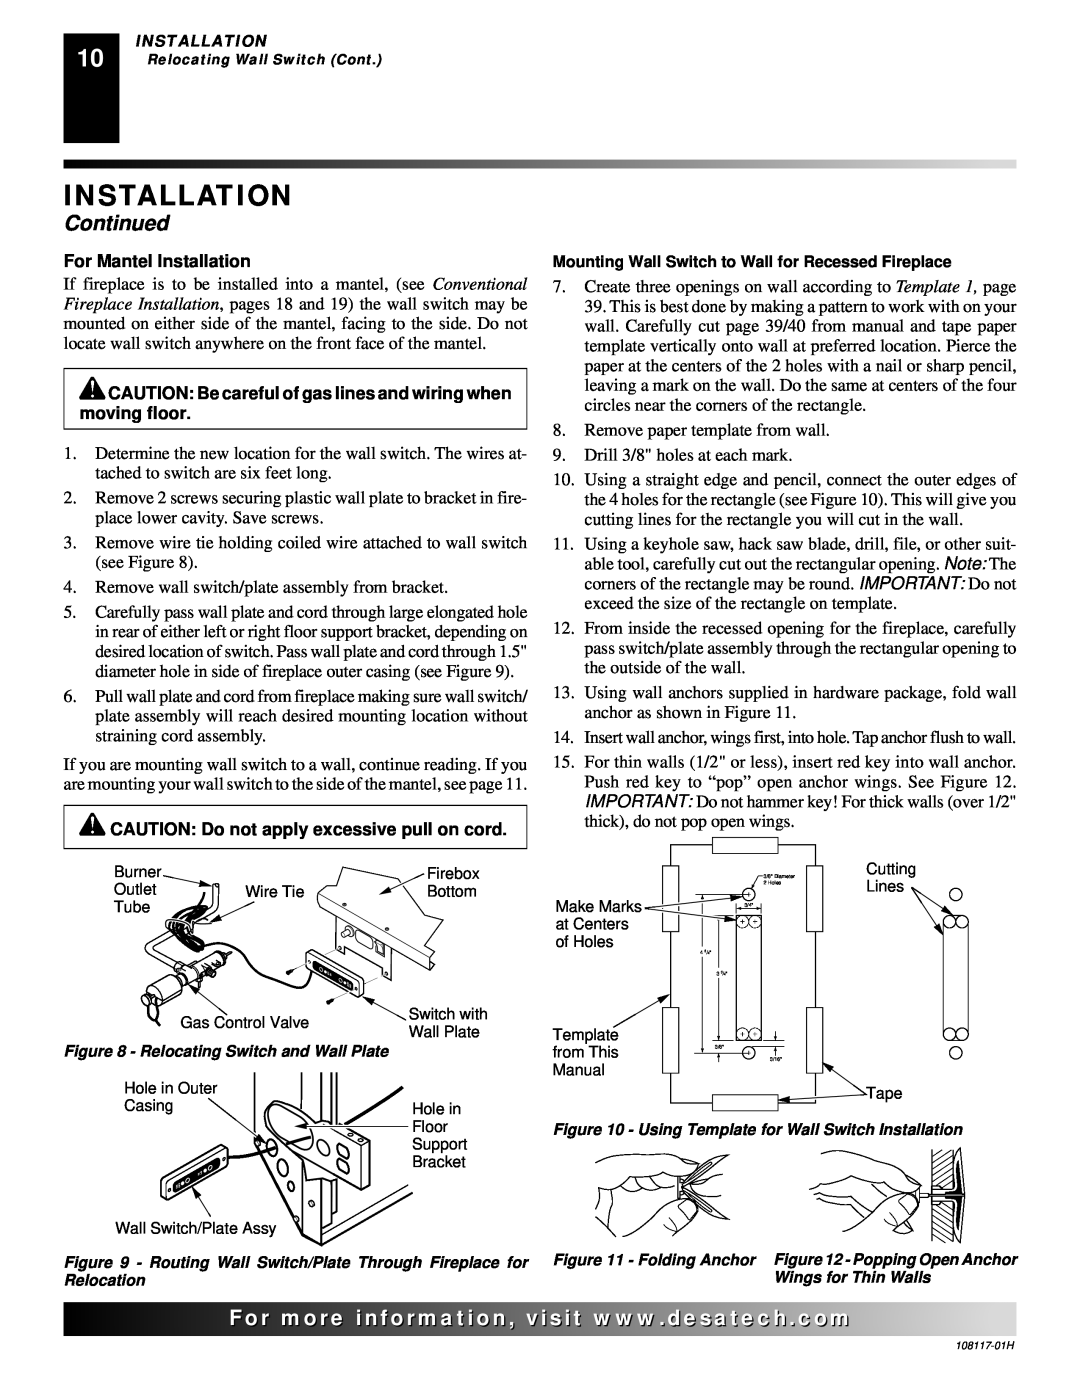 Desa EFP33NR, EFP33PR Continued, For Mantel Installation, CAUTION Do not apply excessive pull on cord 